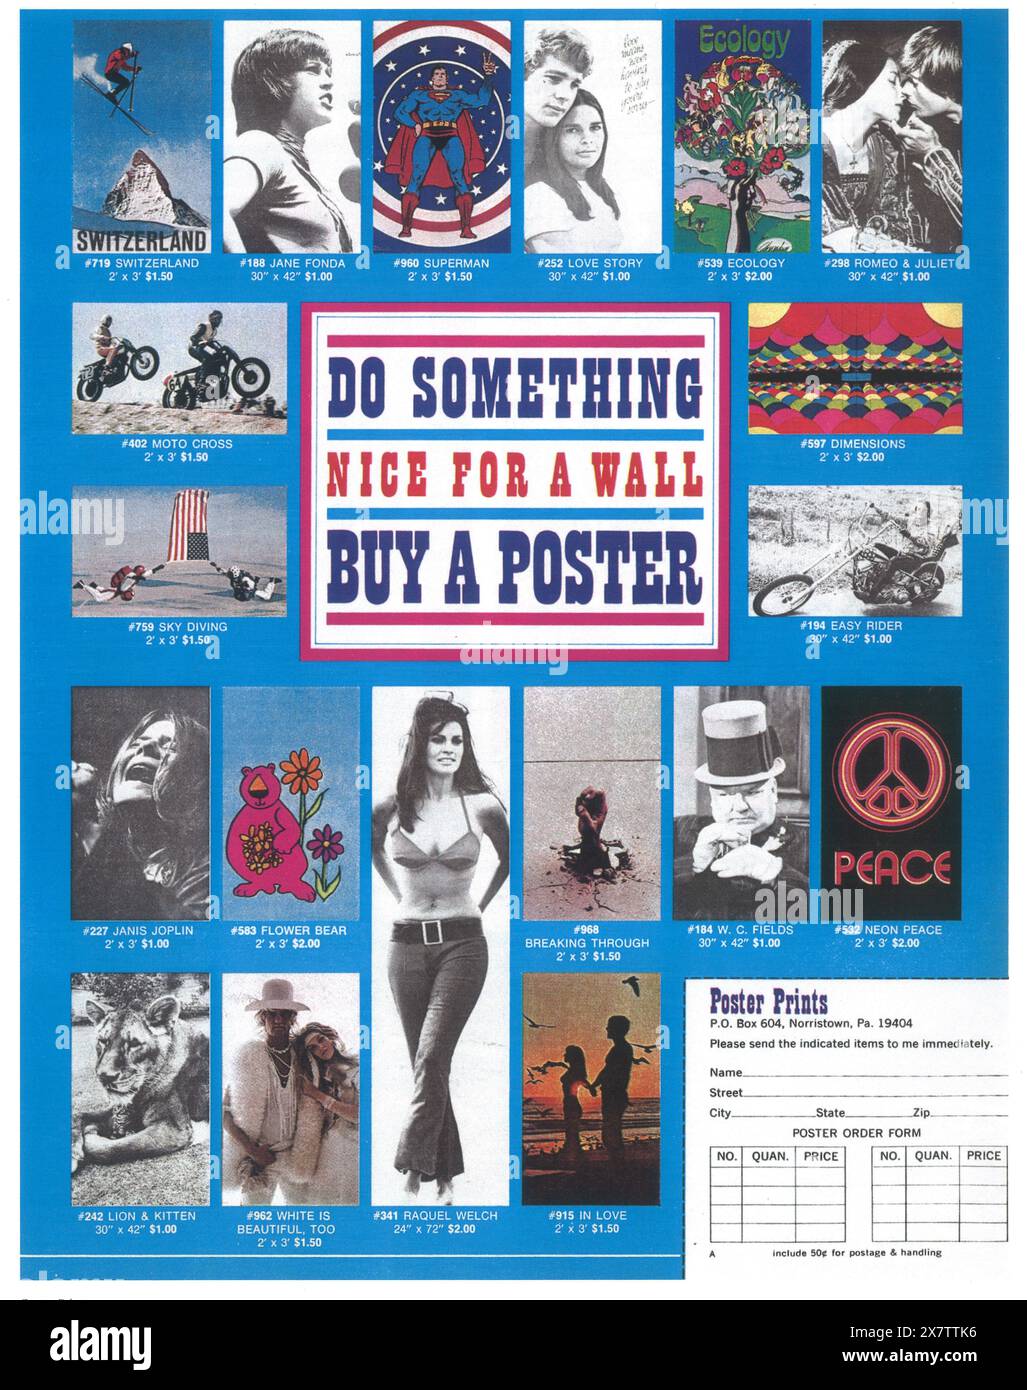 1971 Poster prints ad - do something nice for a wall - buy a poster! Stock Photo